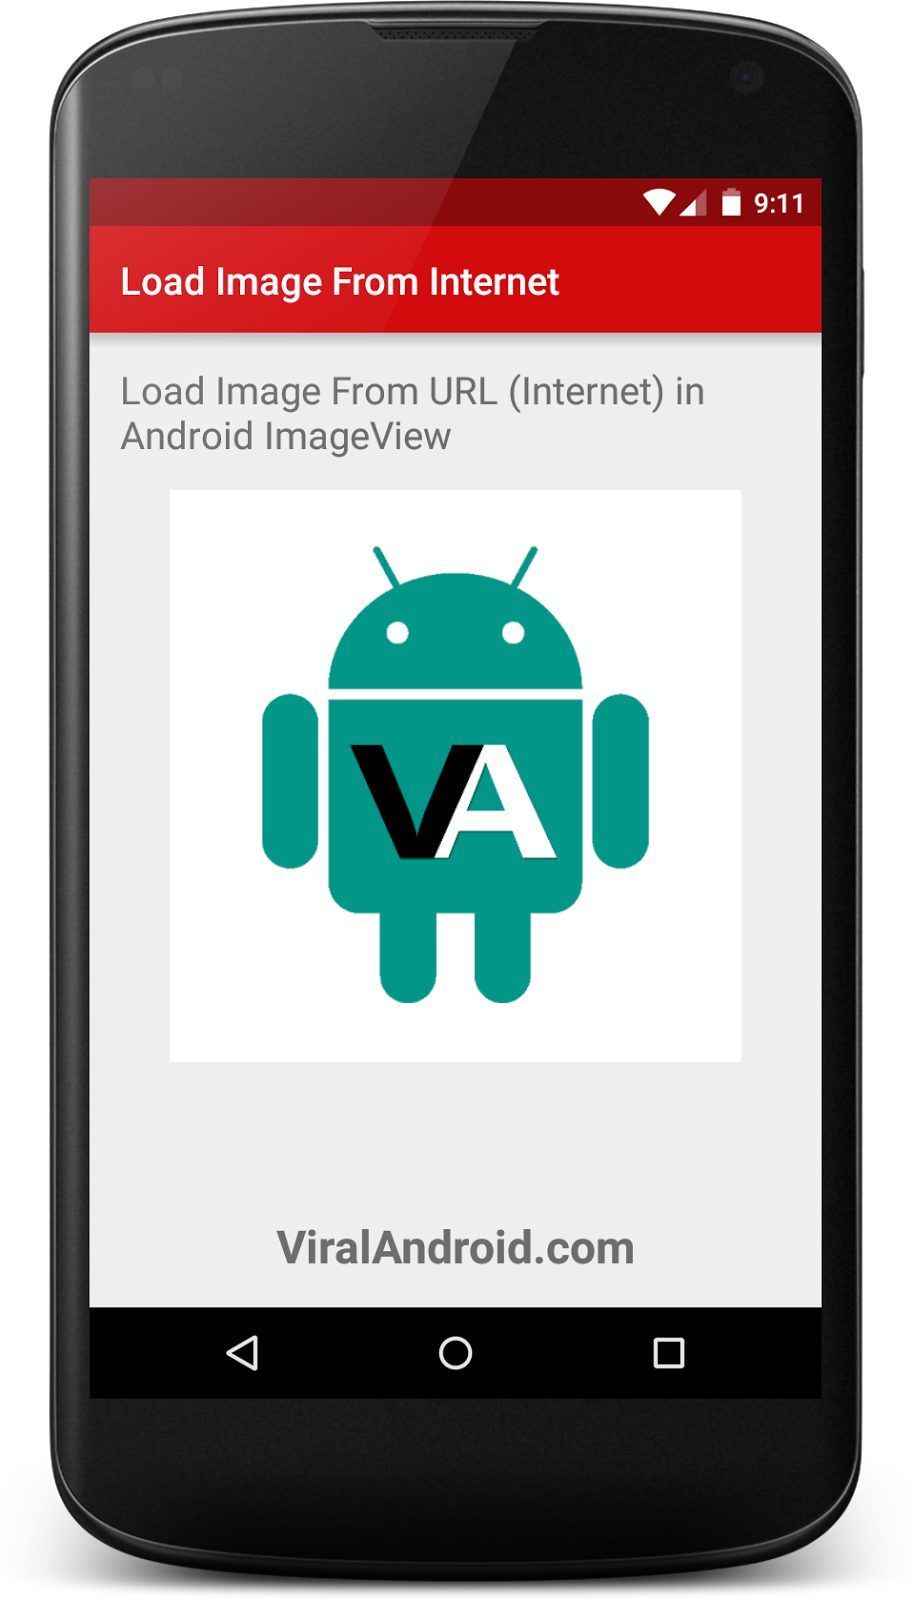 Load Image from URL (Internet) in Android